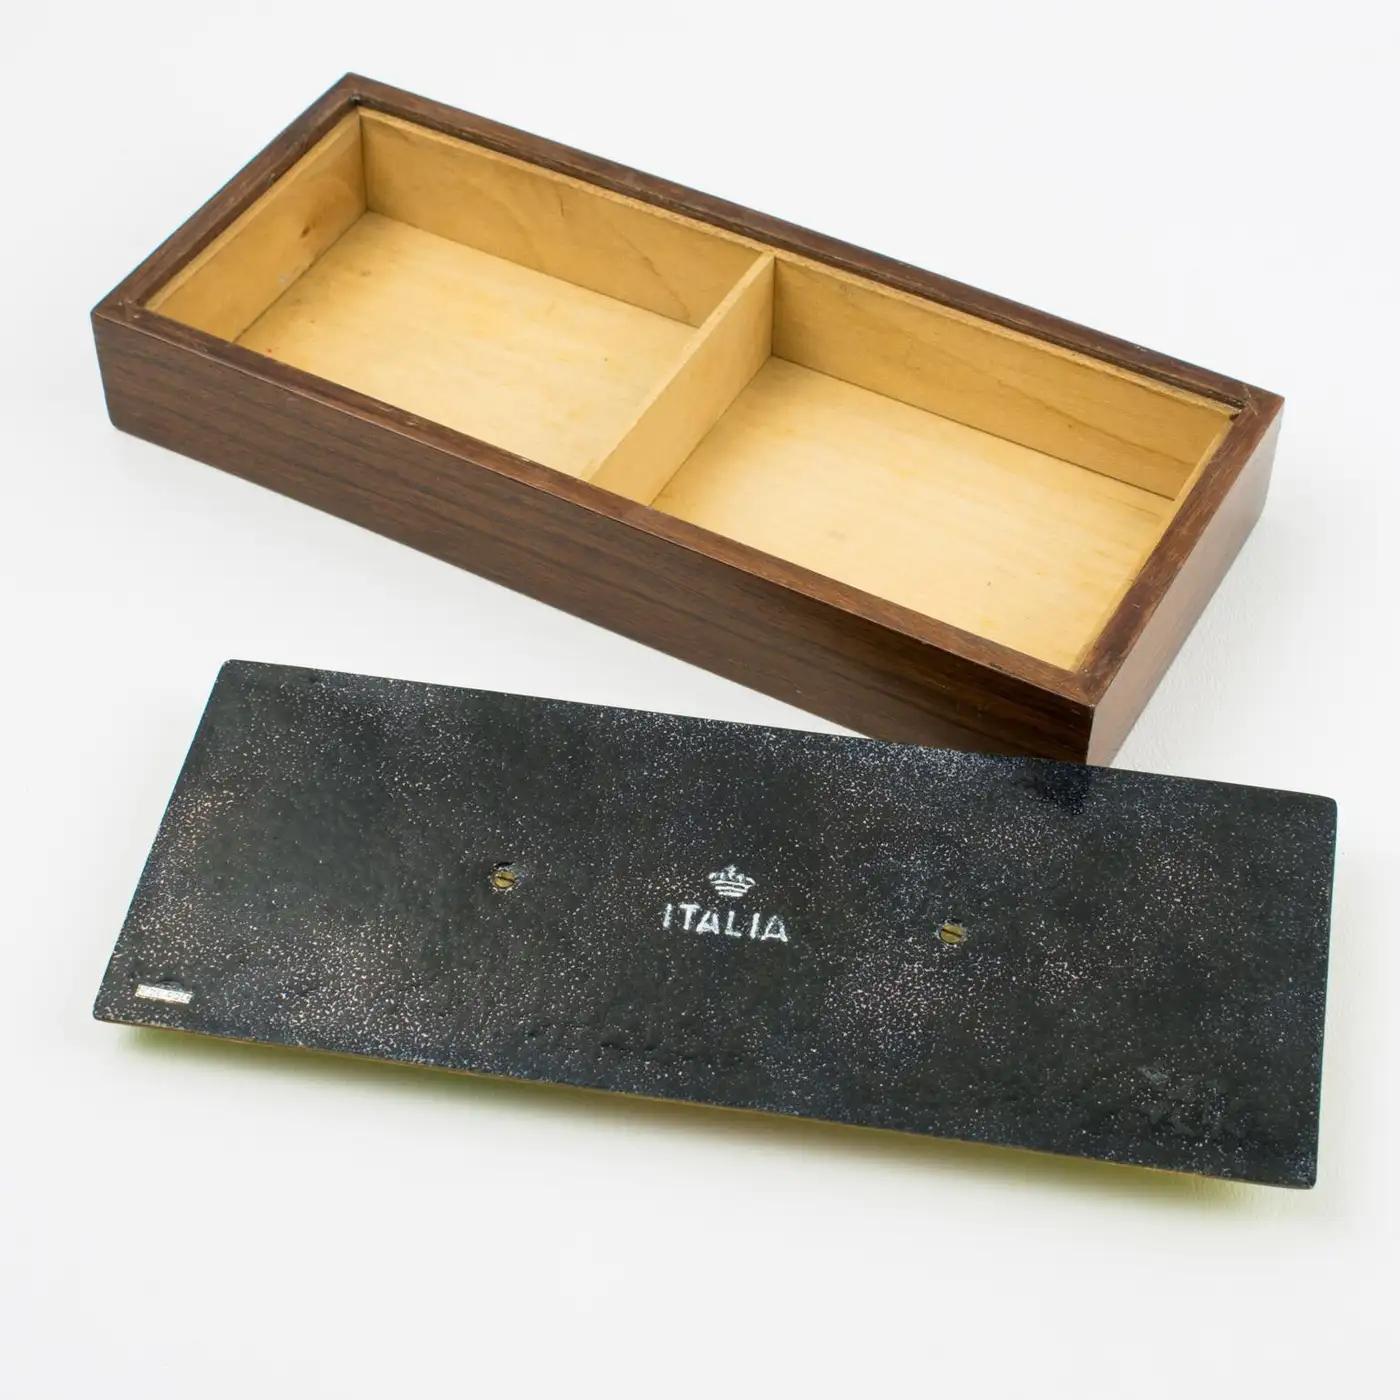 Mid-20th Century Paolo De Poli Wood and Enamel Box, Italy 1950s For Sale